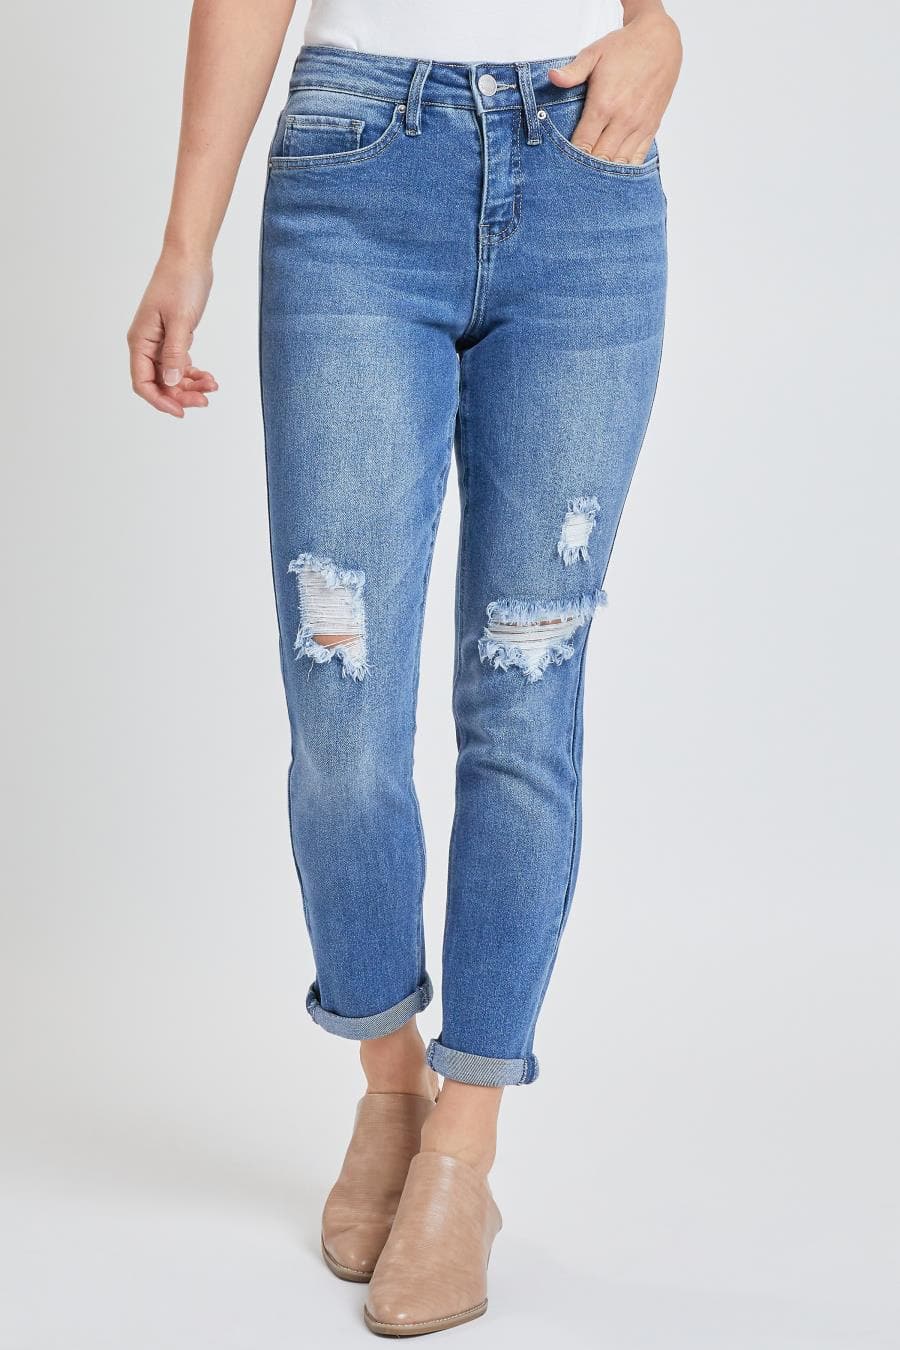 Women's Vintage High Rise Rolled-Cuff Straight Jeans